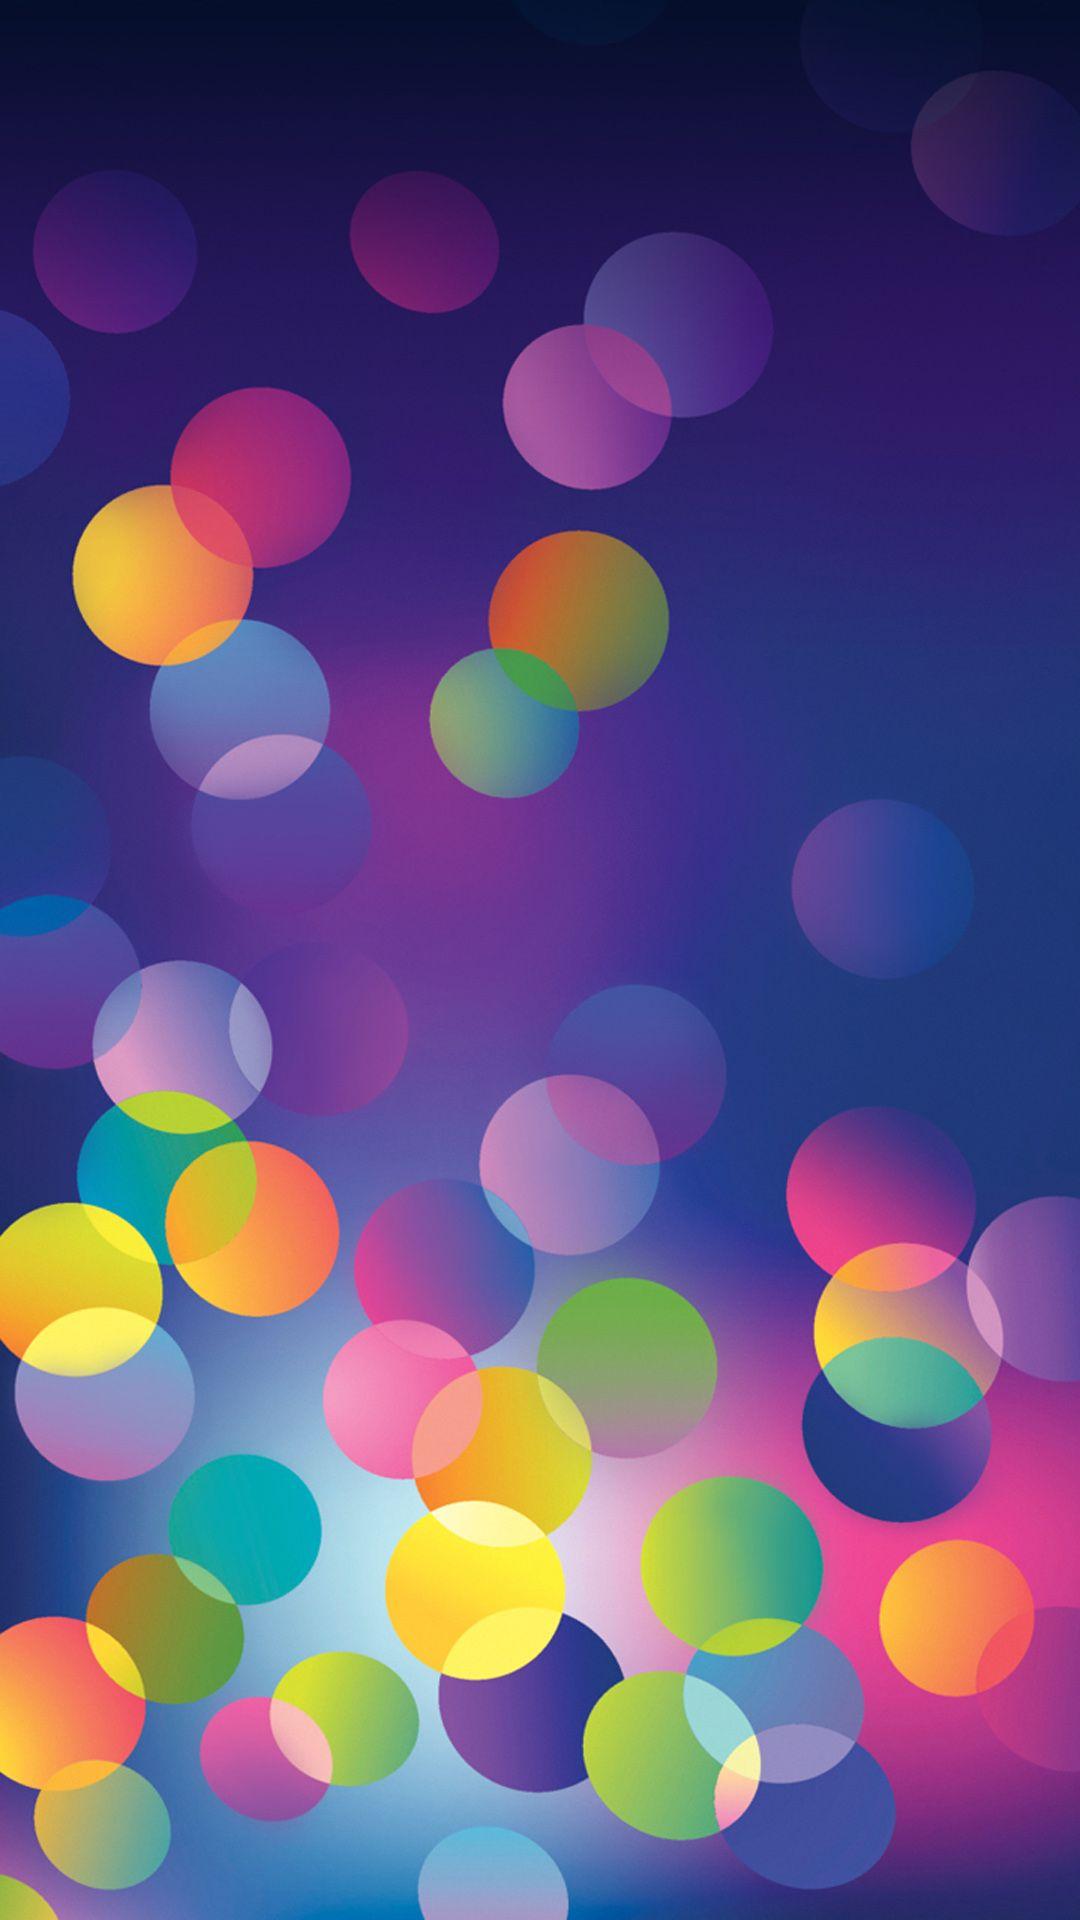 Colour Bubbles. IPhone wallpaper gradient abstract. Tap to